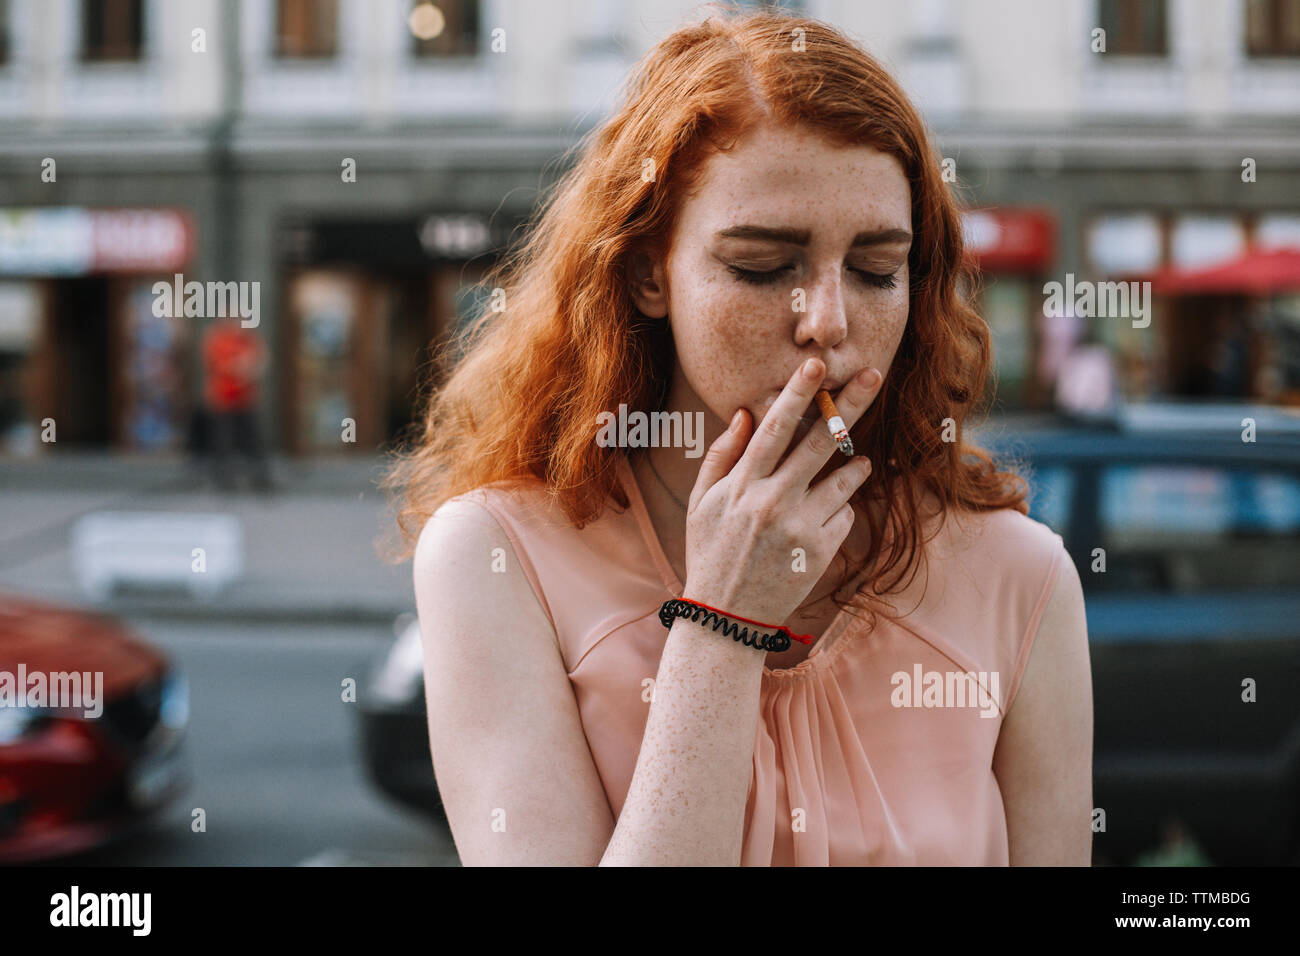 Young woman with freckles smoking cigarette while standing in street Stock Photo